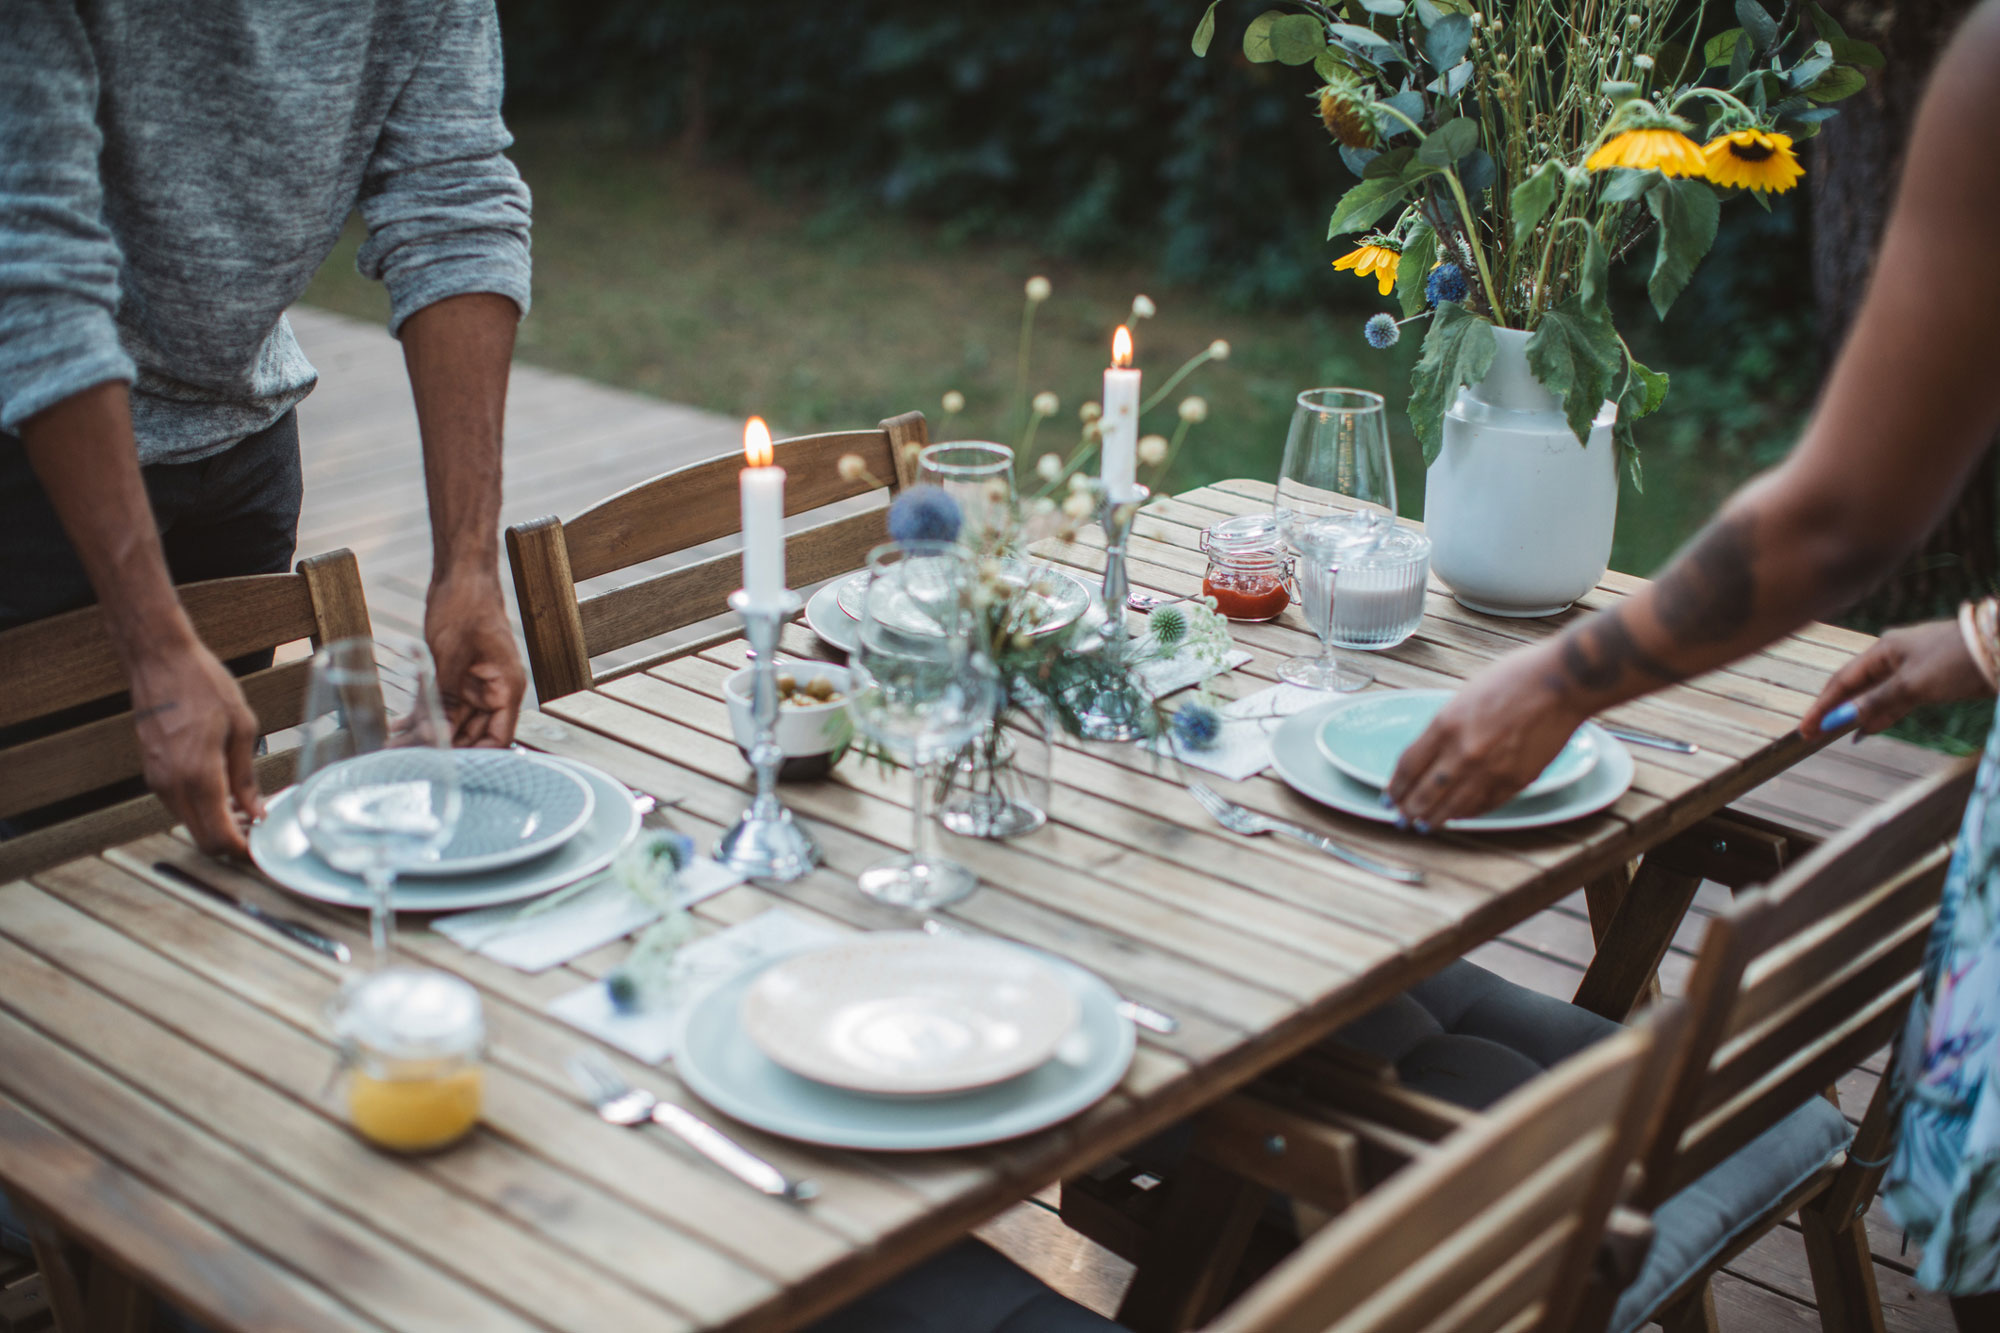 Couple preparing dinner table in backyard of the cottage.